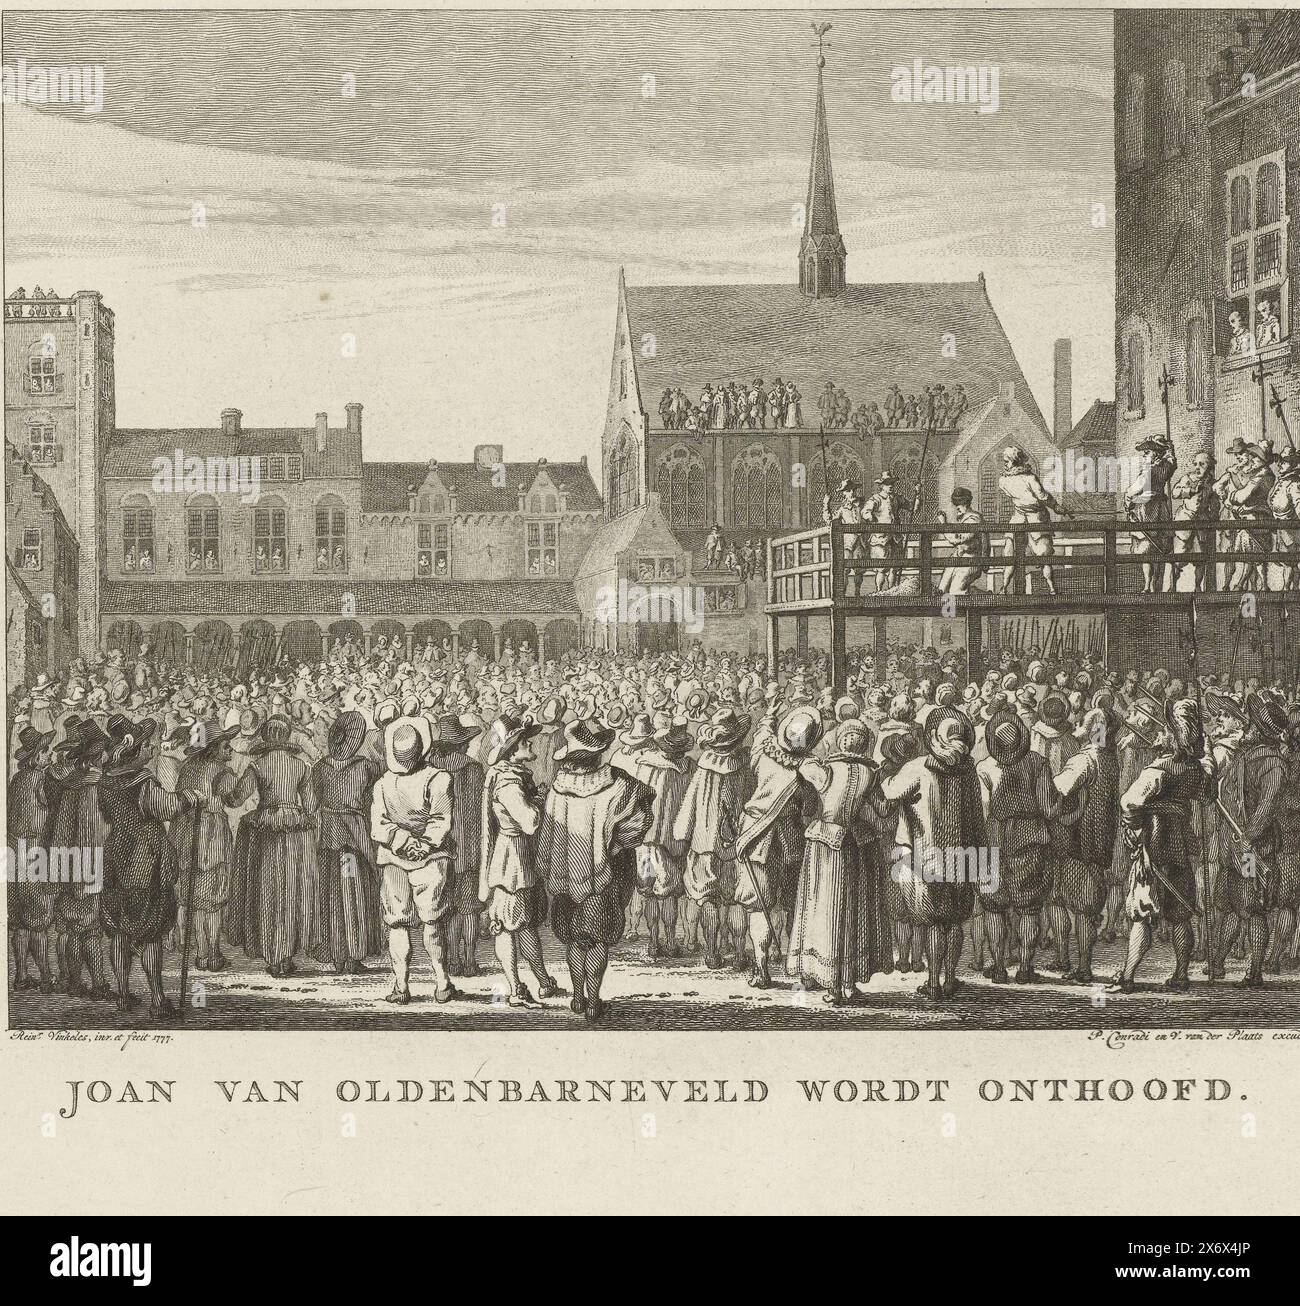 Beheading of Johan van Oldenbarnevelt, 1619, Joan van Oldenbarnevelt is beheaded (title on object), Johan van Oldenbarnevelt kneels blindfolded before his beheading on the scaffold at the Binnenhof in The Hague on May 13, 1619. Seen from the square with the one gathered spectators., print, print maker: Reinier Vinkeles (I), after own design by: Reinier Vinkeles (I), (mentioned on object), publisher: P. Conradi en van der Plaats, (mentioned on object), Northern Netherlands, 1777, paper, etching, height, 224 mm × width, 278 mm Stock Photo